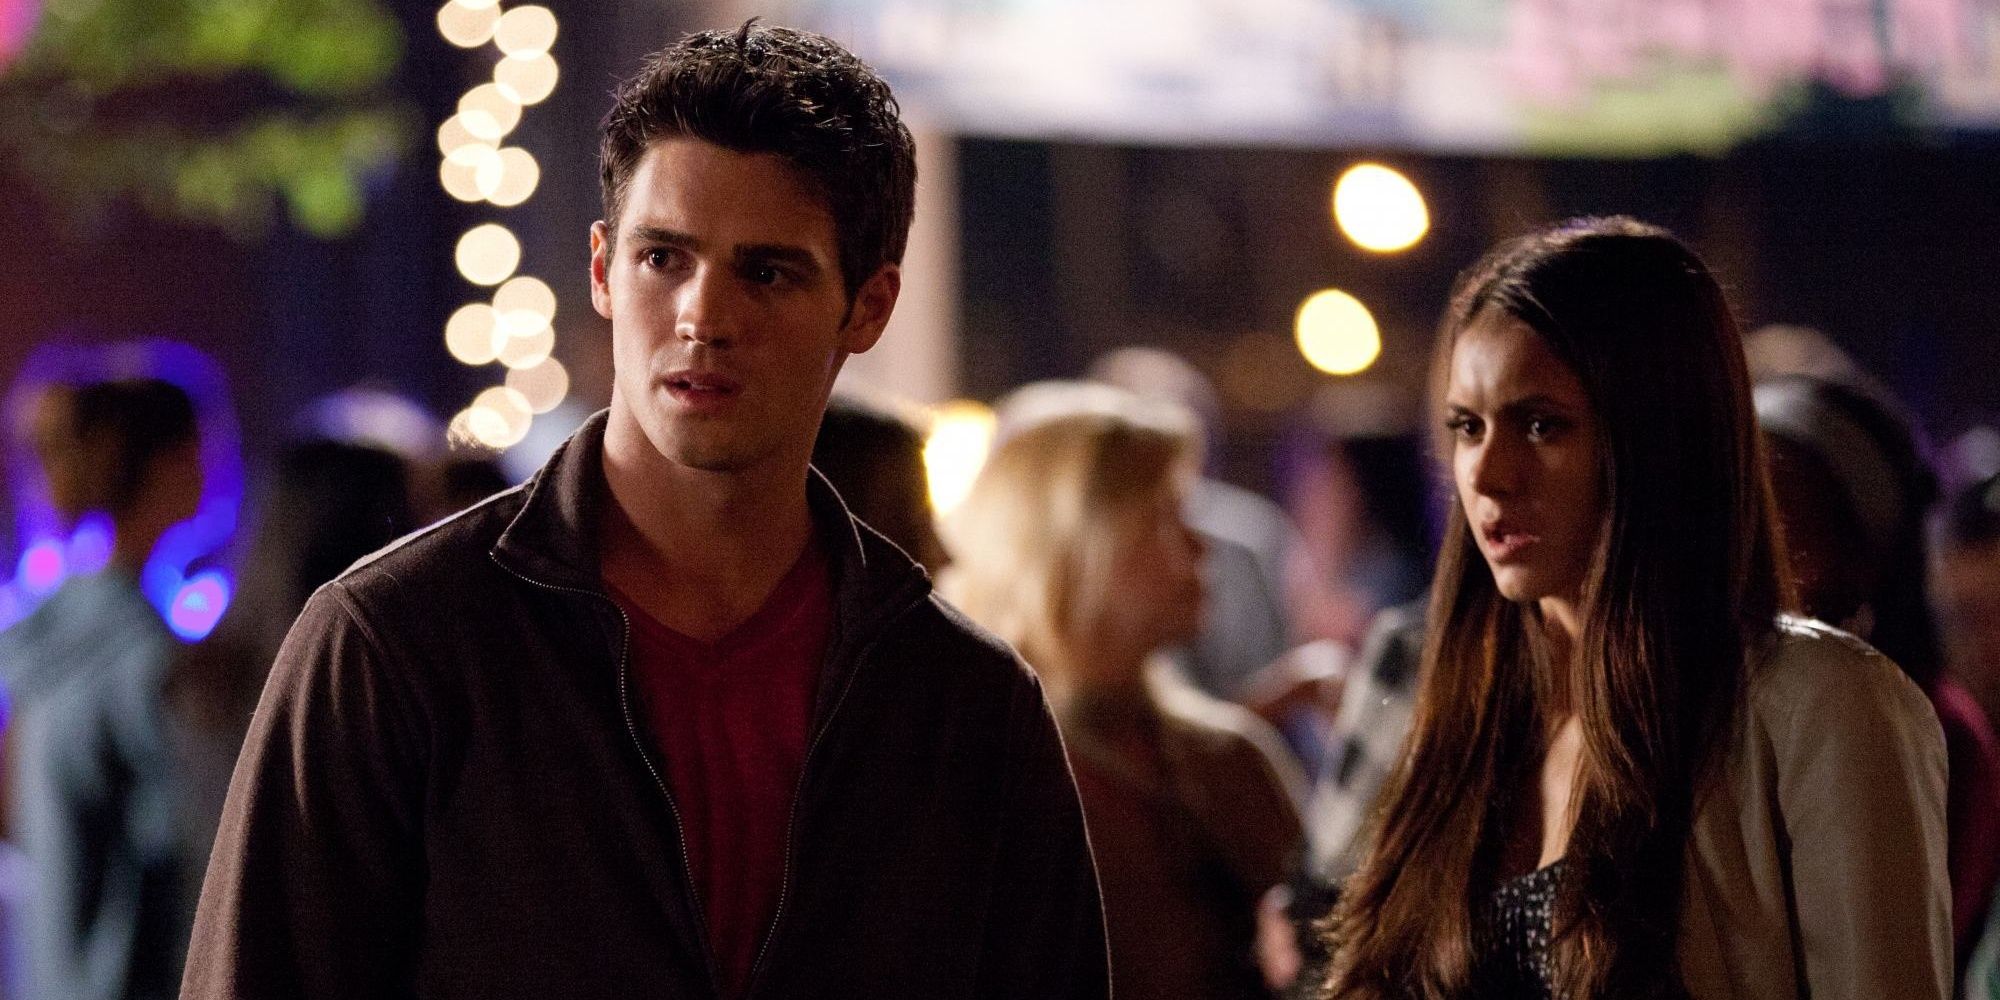 Elena and her friend look bewildered in a crowd in The Vampire Diaries